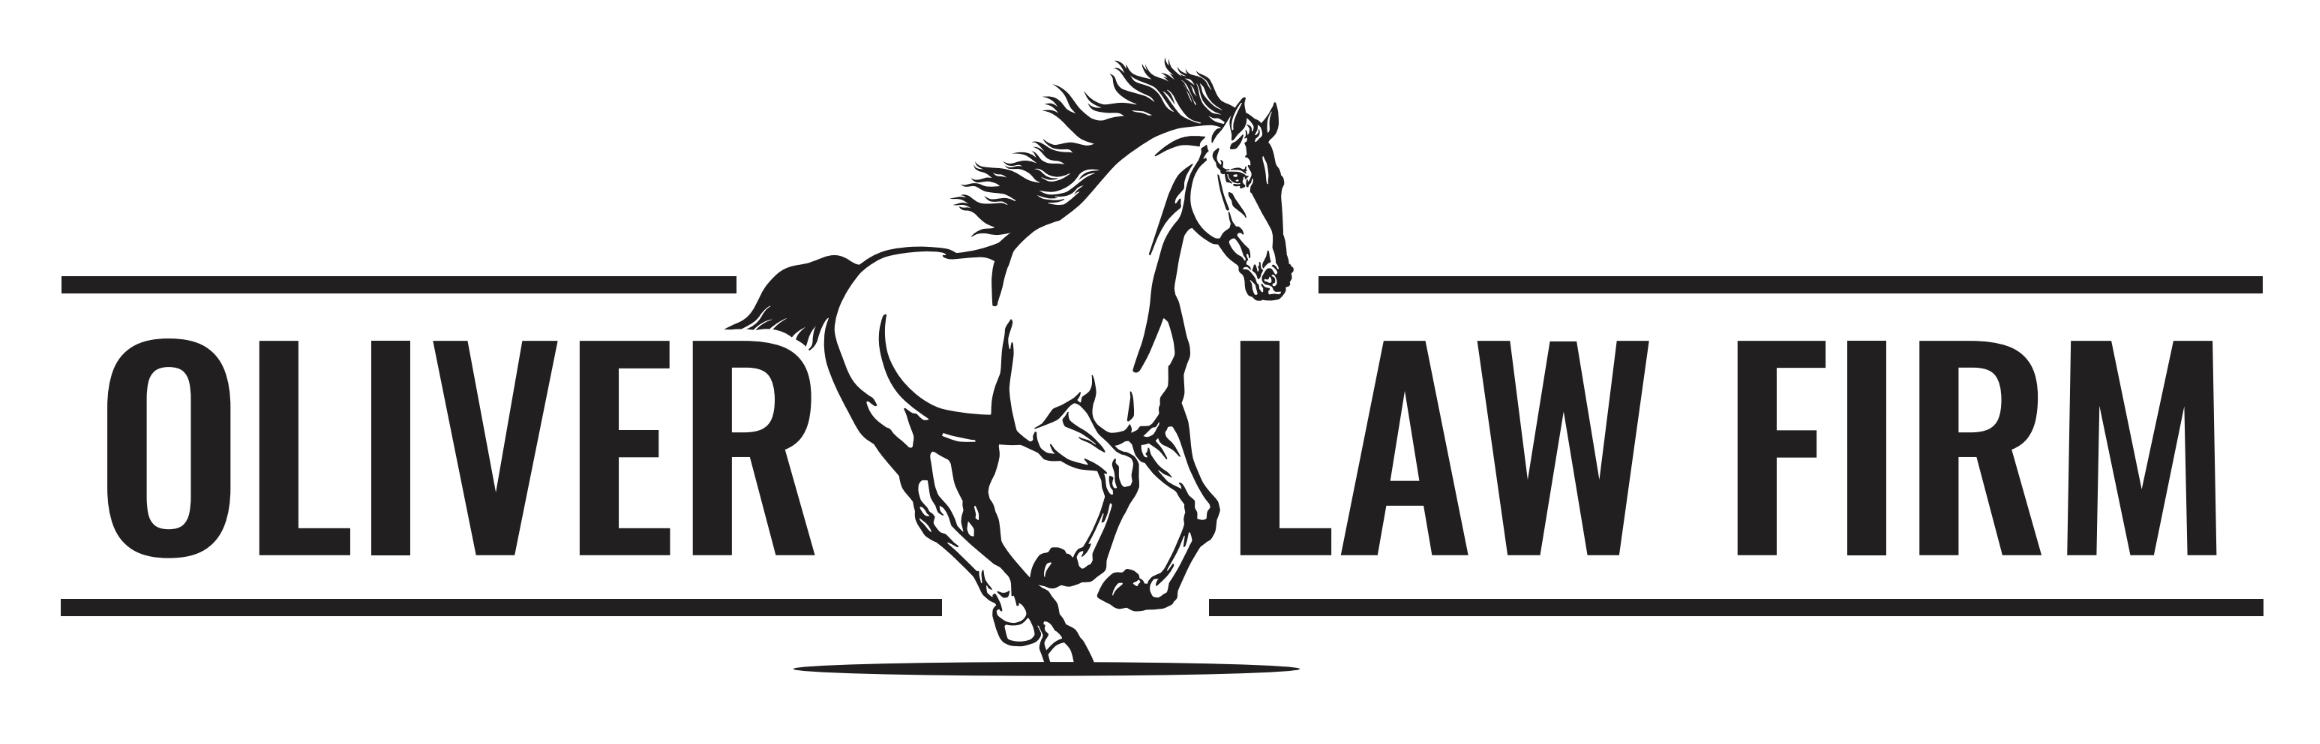 Oliver Law Firm - Personal Injury Lawyer specializing in 18-Wheeler Trucking Accidents